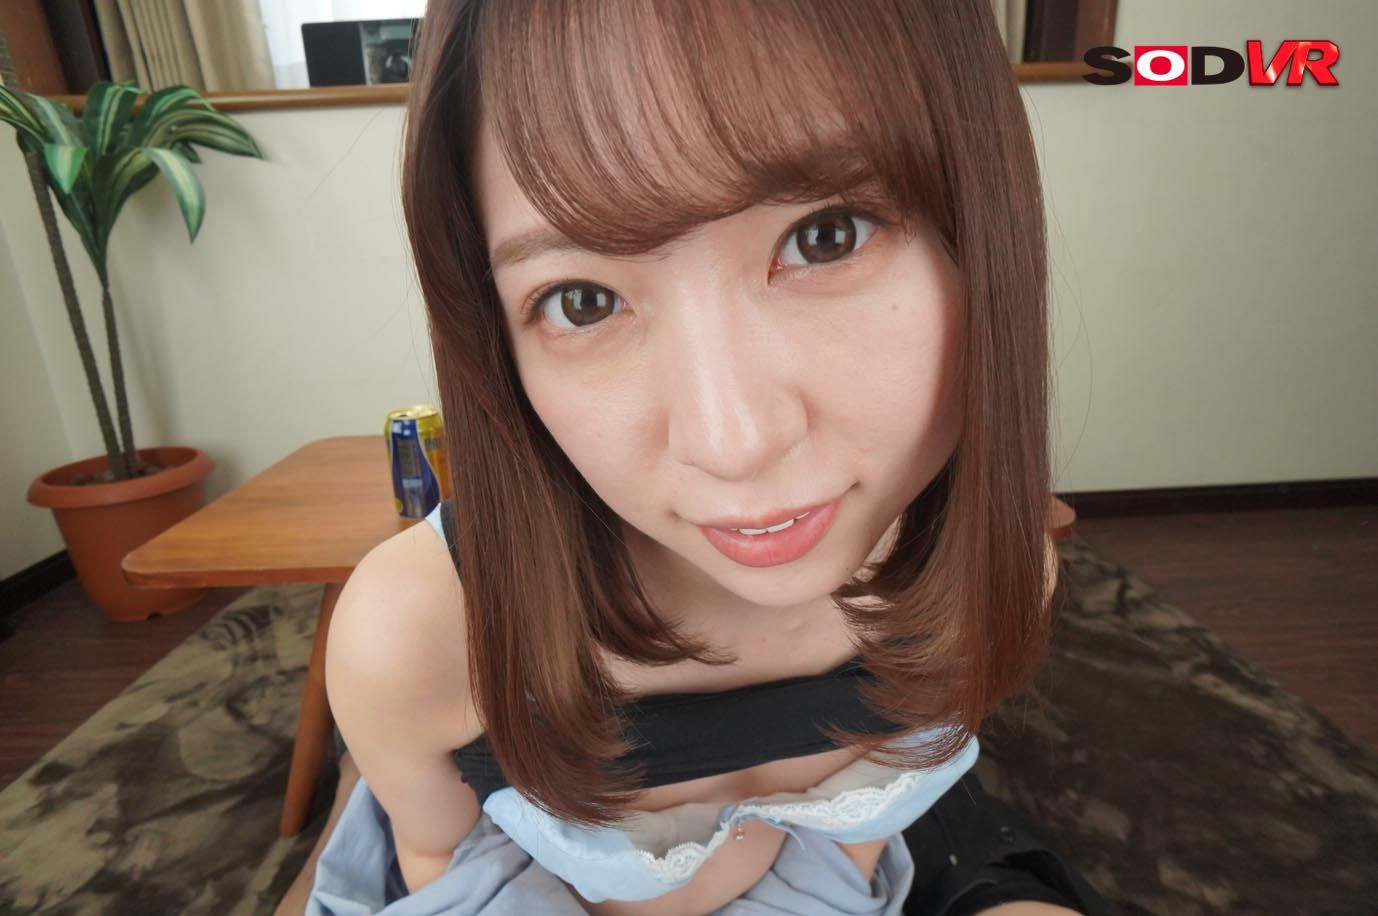 Up Close from 25 cm Away  - "I Want to See Your O-Face!"; Immersive Close-Up JAV VR Porn Slideshow